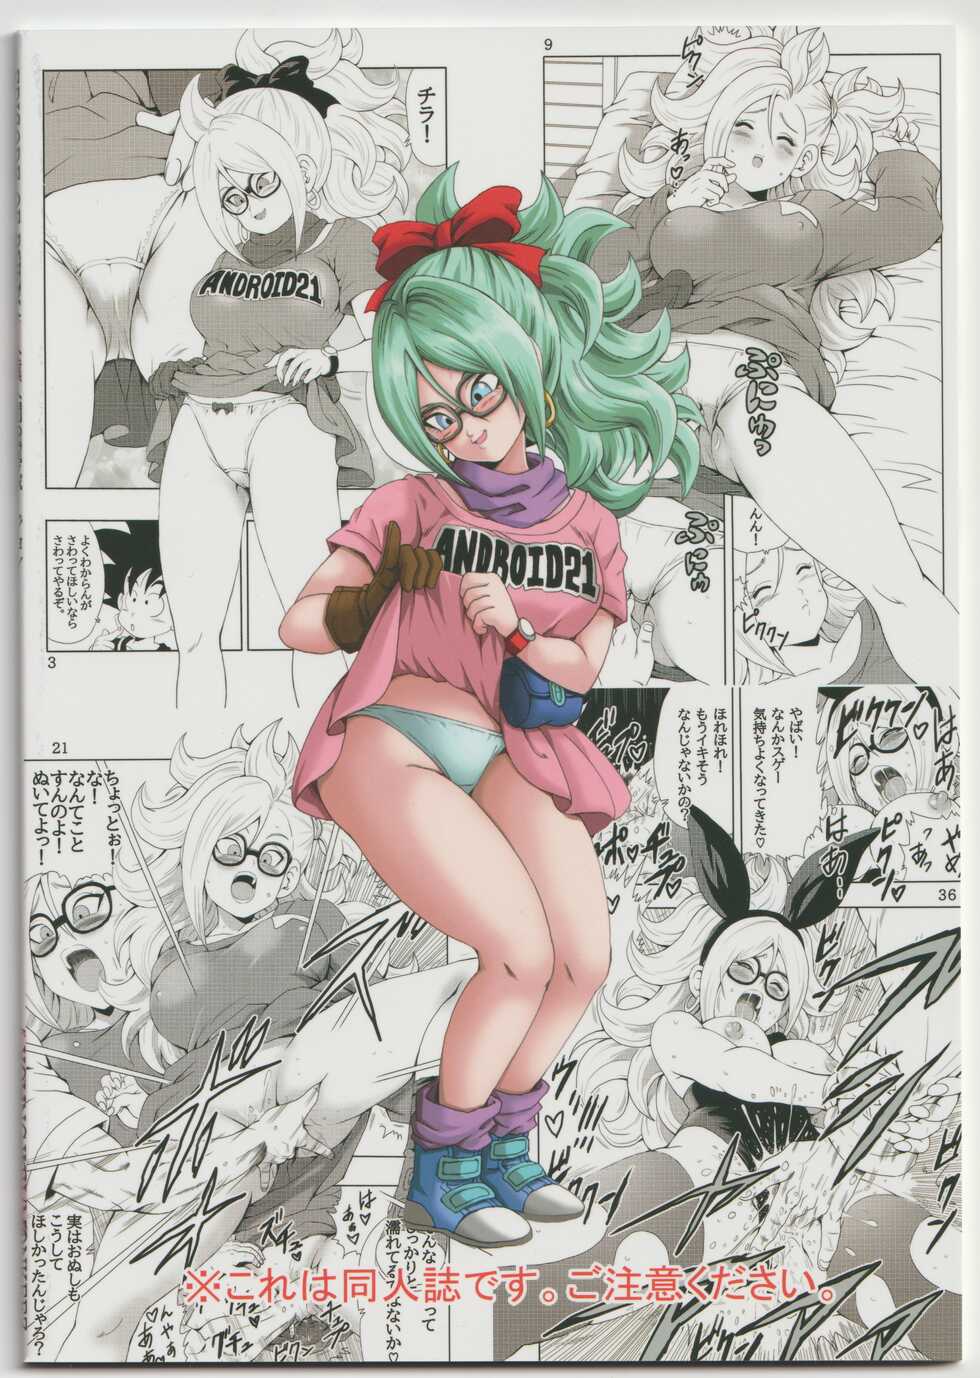 [Monkees (YoungJiJii)] Episode of Bulma - Android 21 Version (Dragon Ball) - Page 28